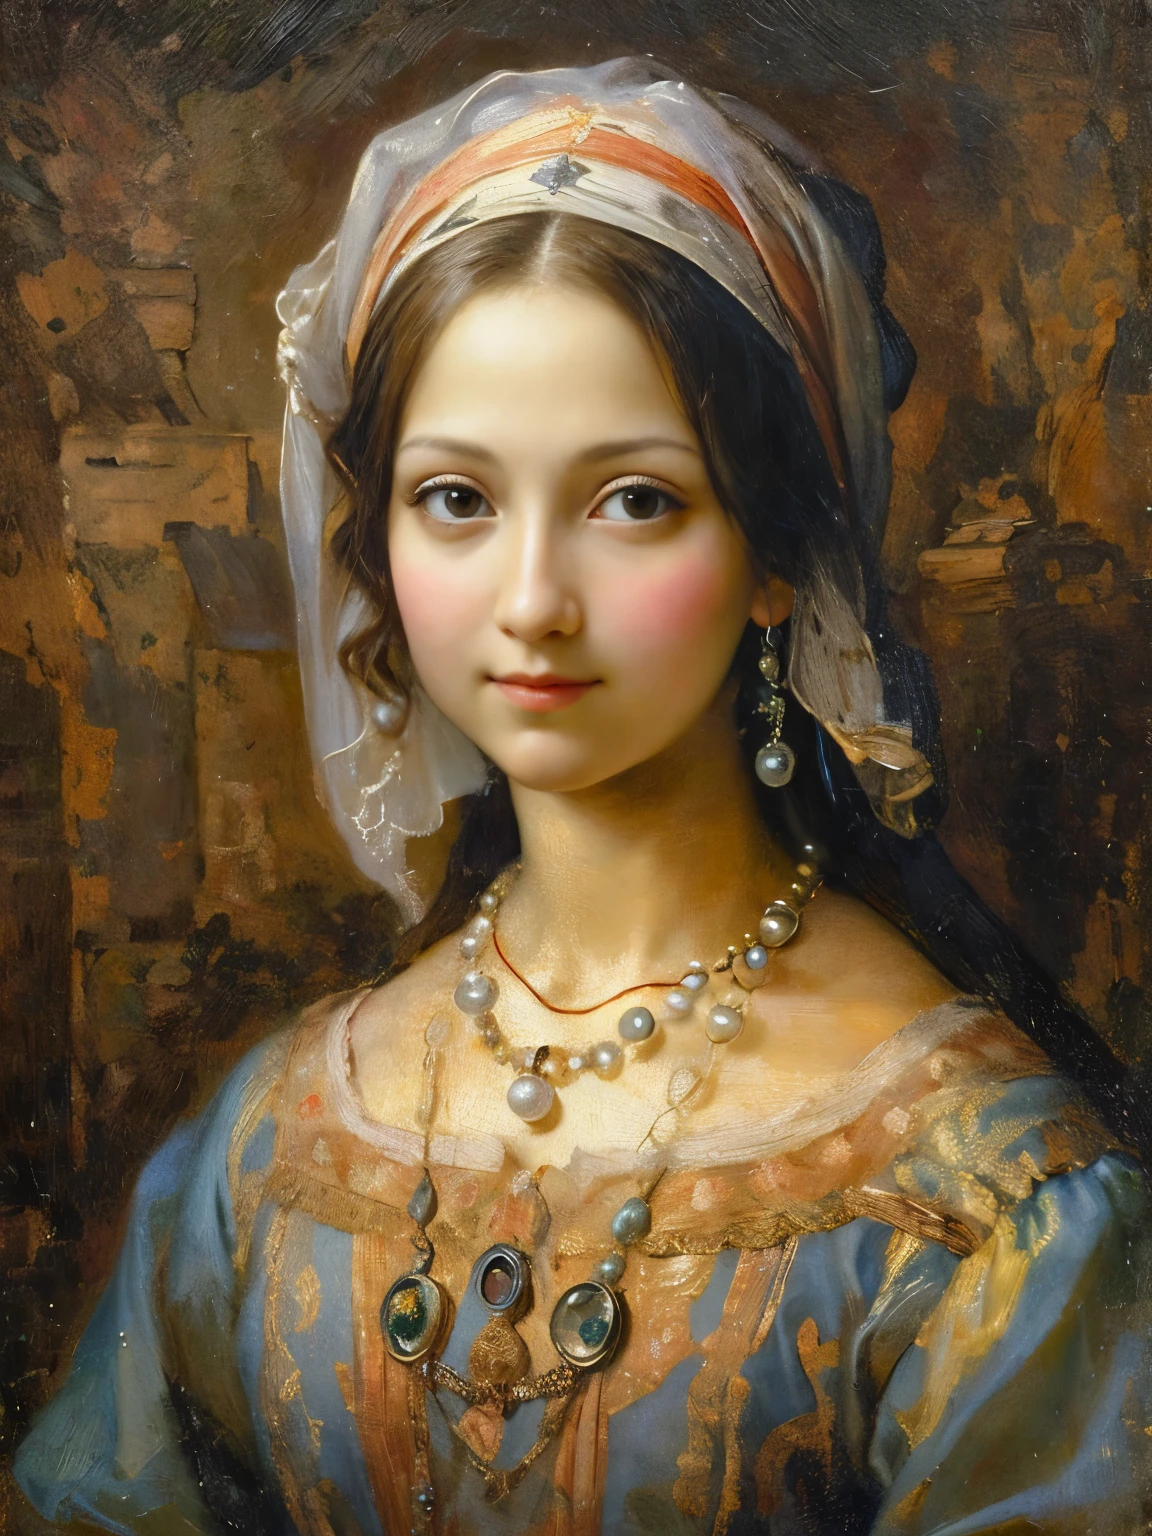 an oil painting，da vinci art style。beuaty girl，with a round face，ssmile：1.37，Beautiful medieval clothing，pearls necklace，Artistic creativity:1.37,Oil brush strokes，Oil painting texture，Detailed description of optye